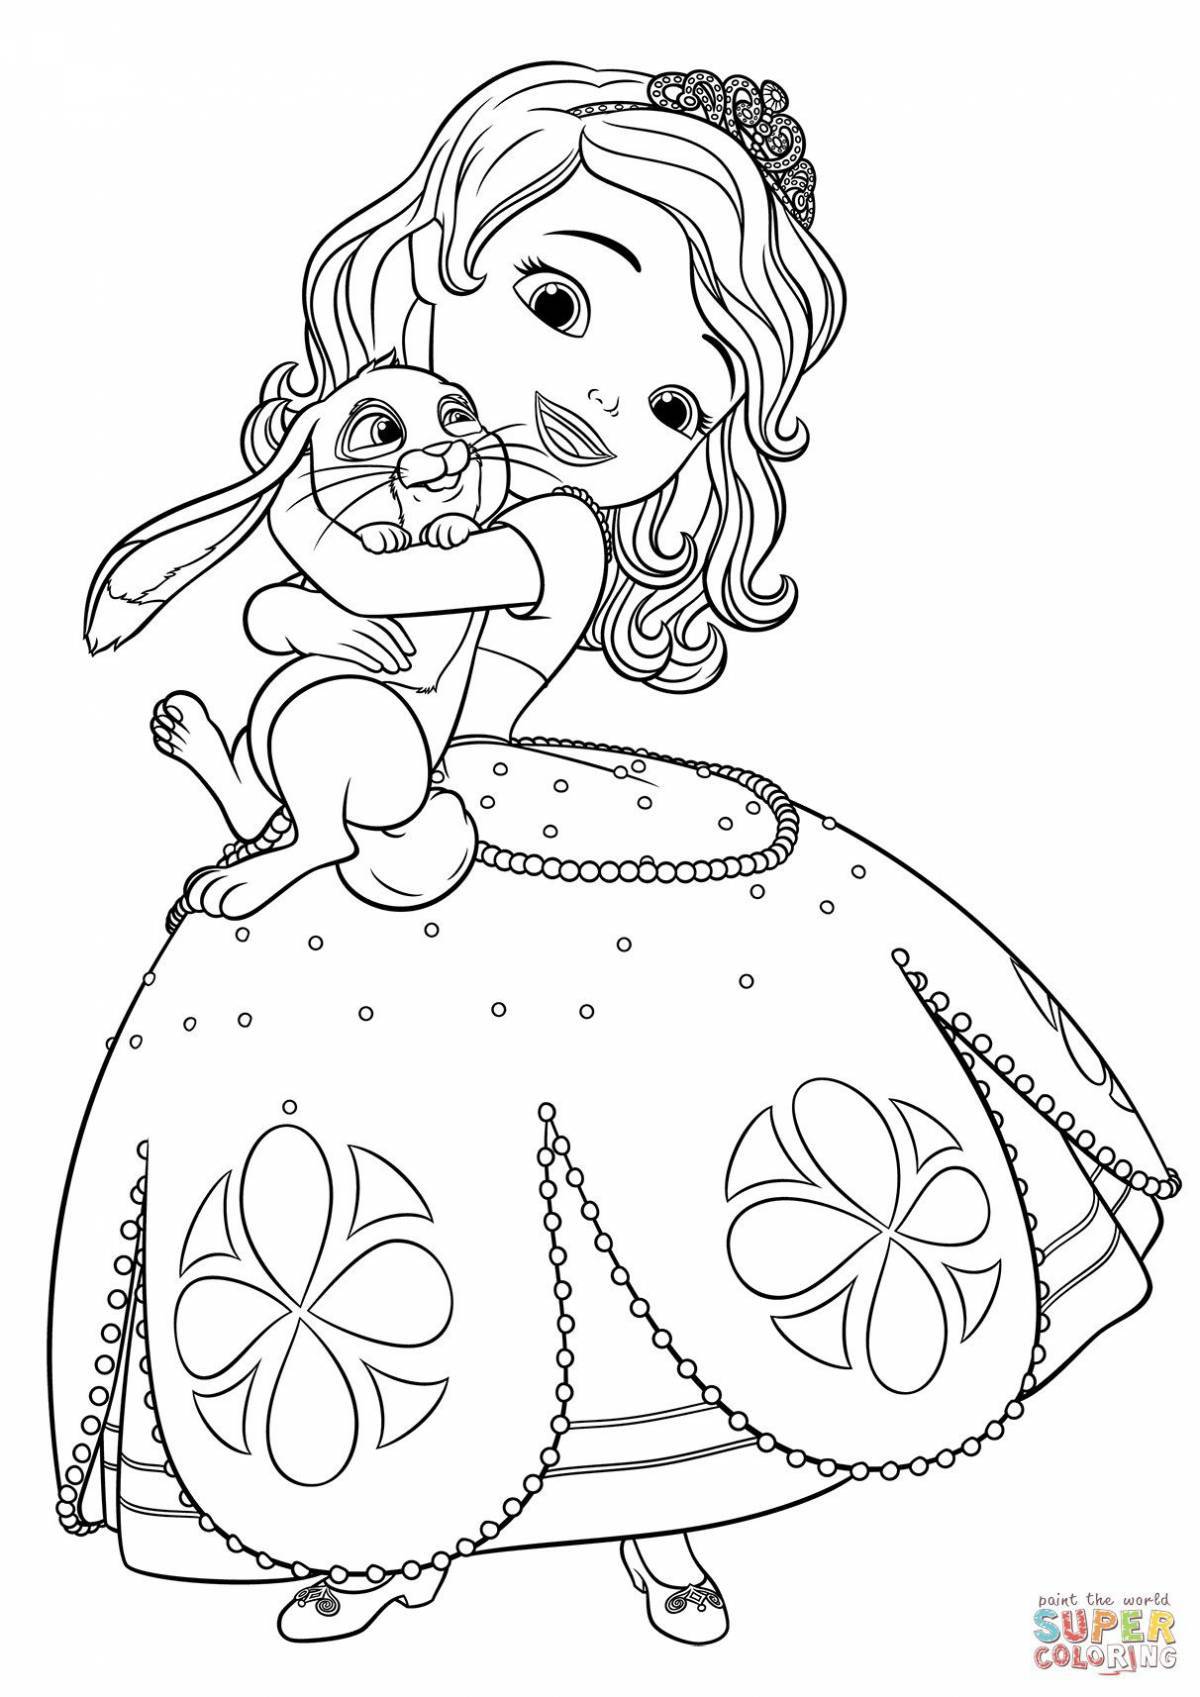 Sparkly princess coloring pages for kids